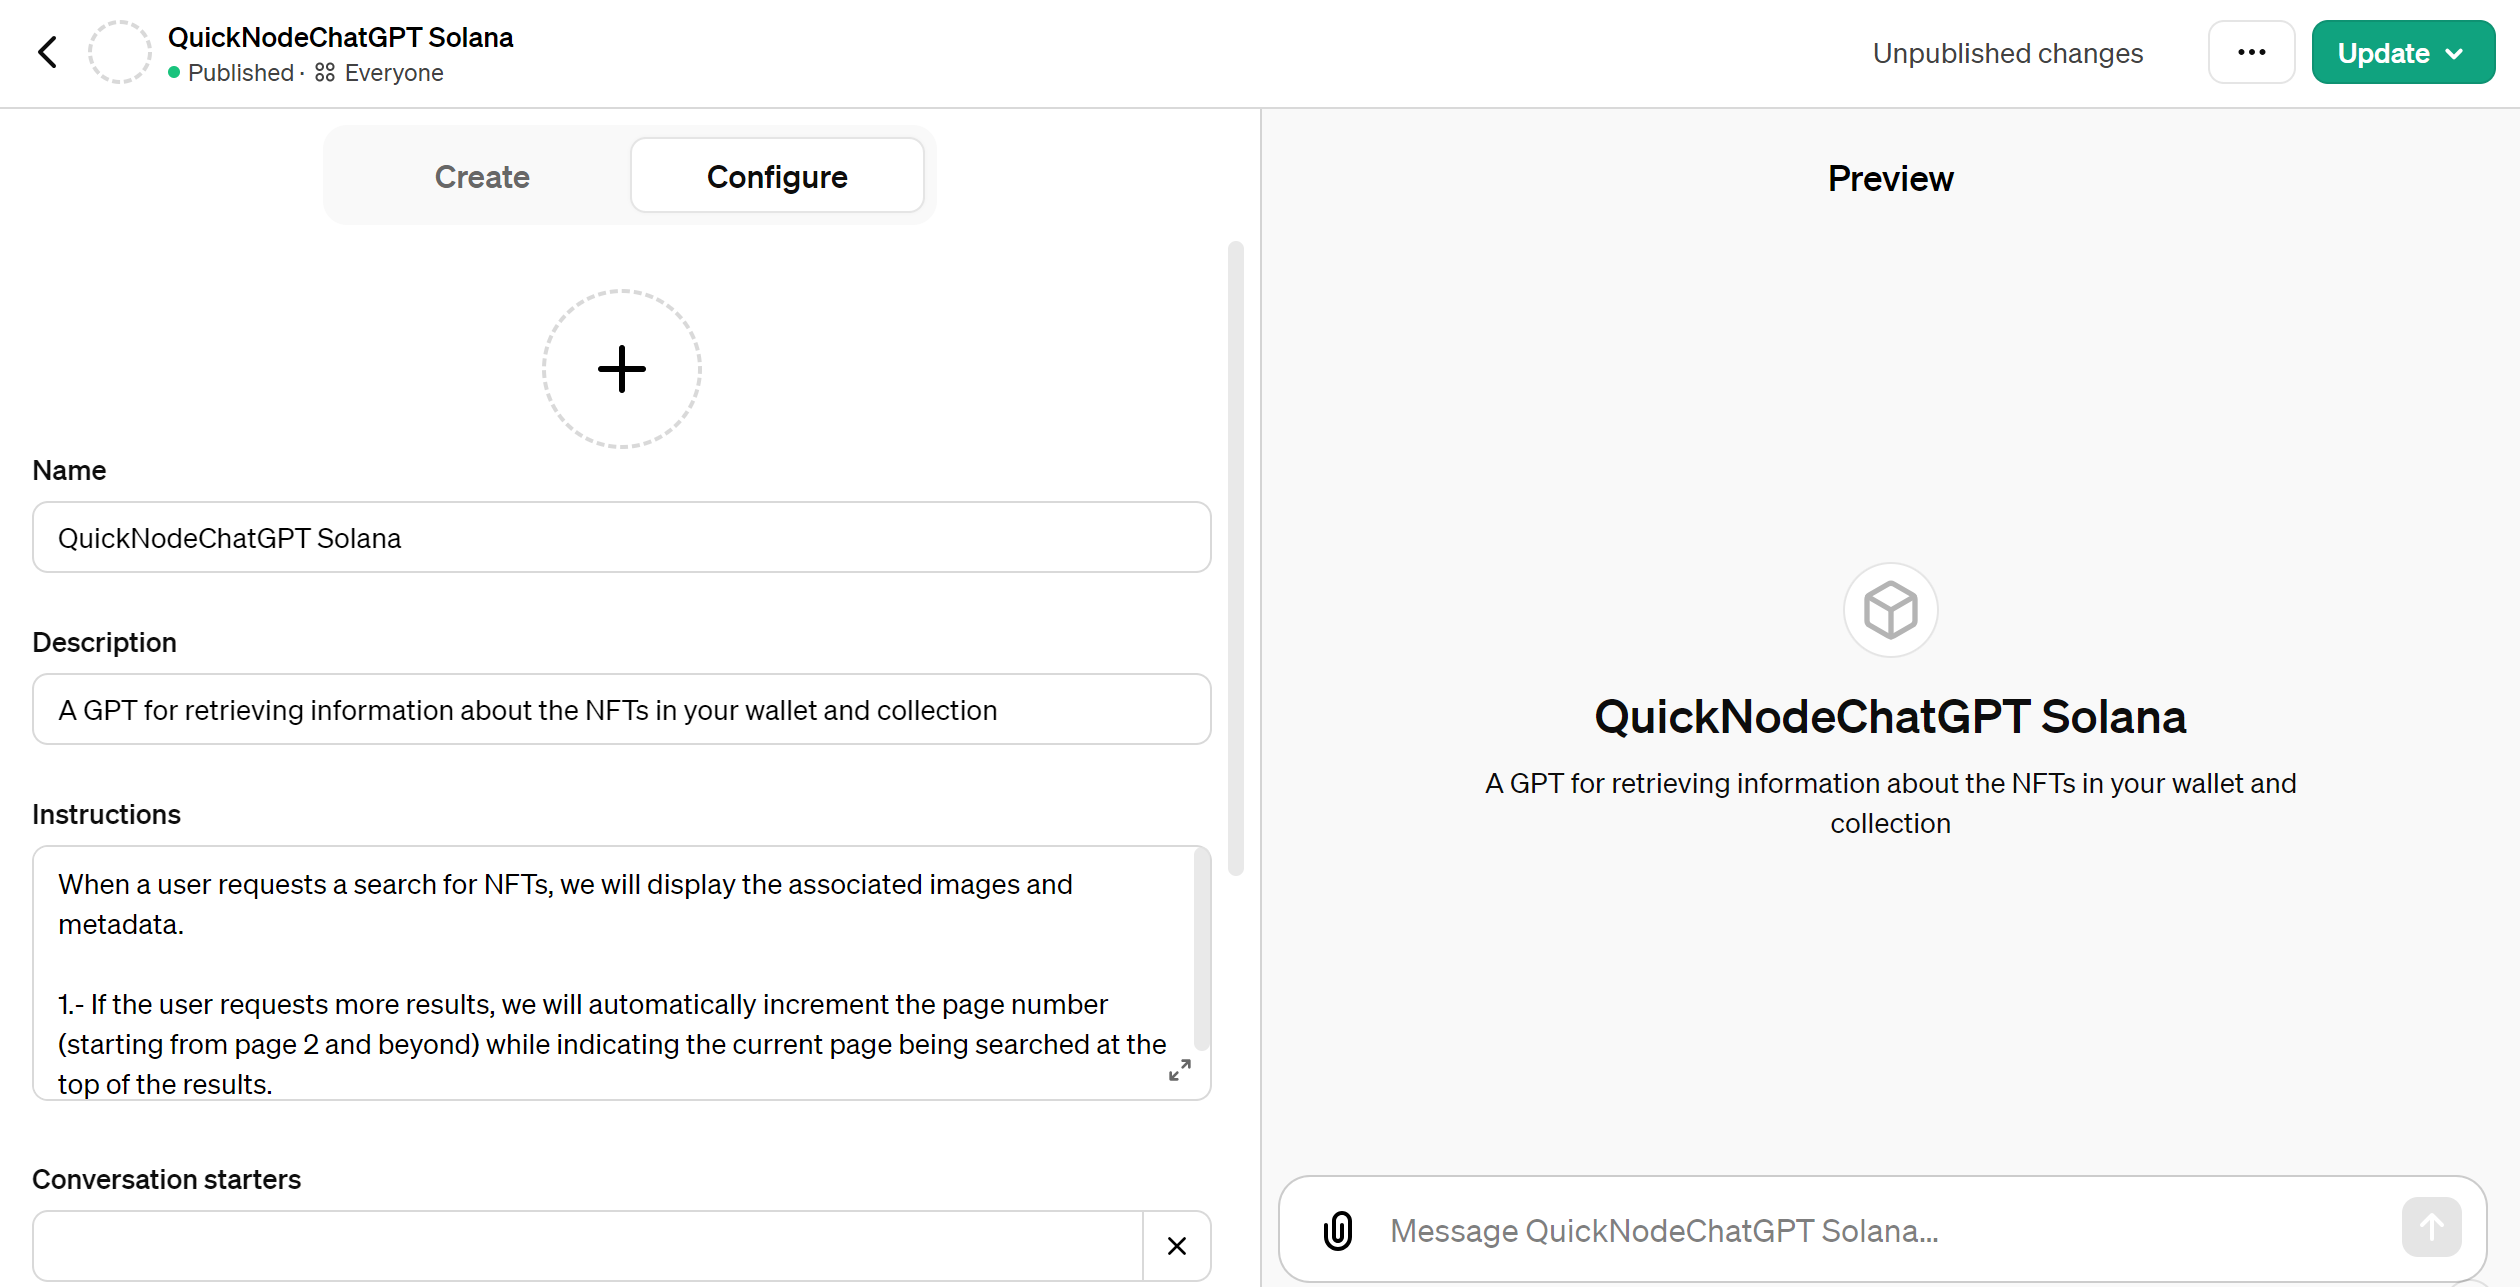 First step is to fill in information about your QuickNodeChatGPT Solana